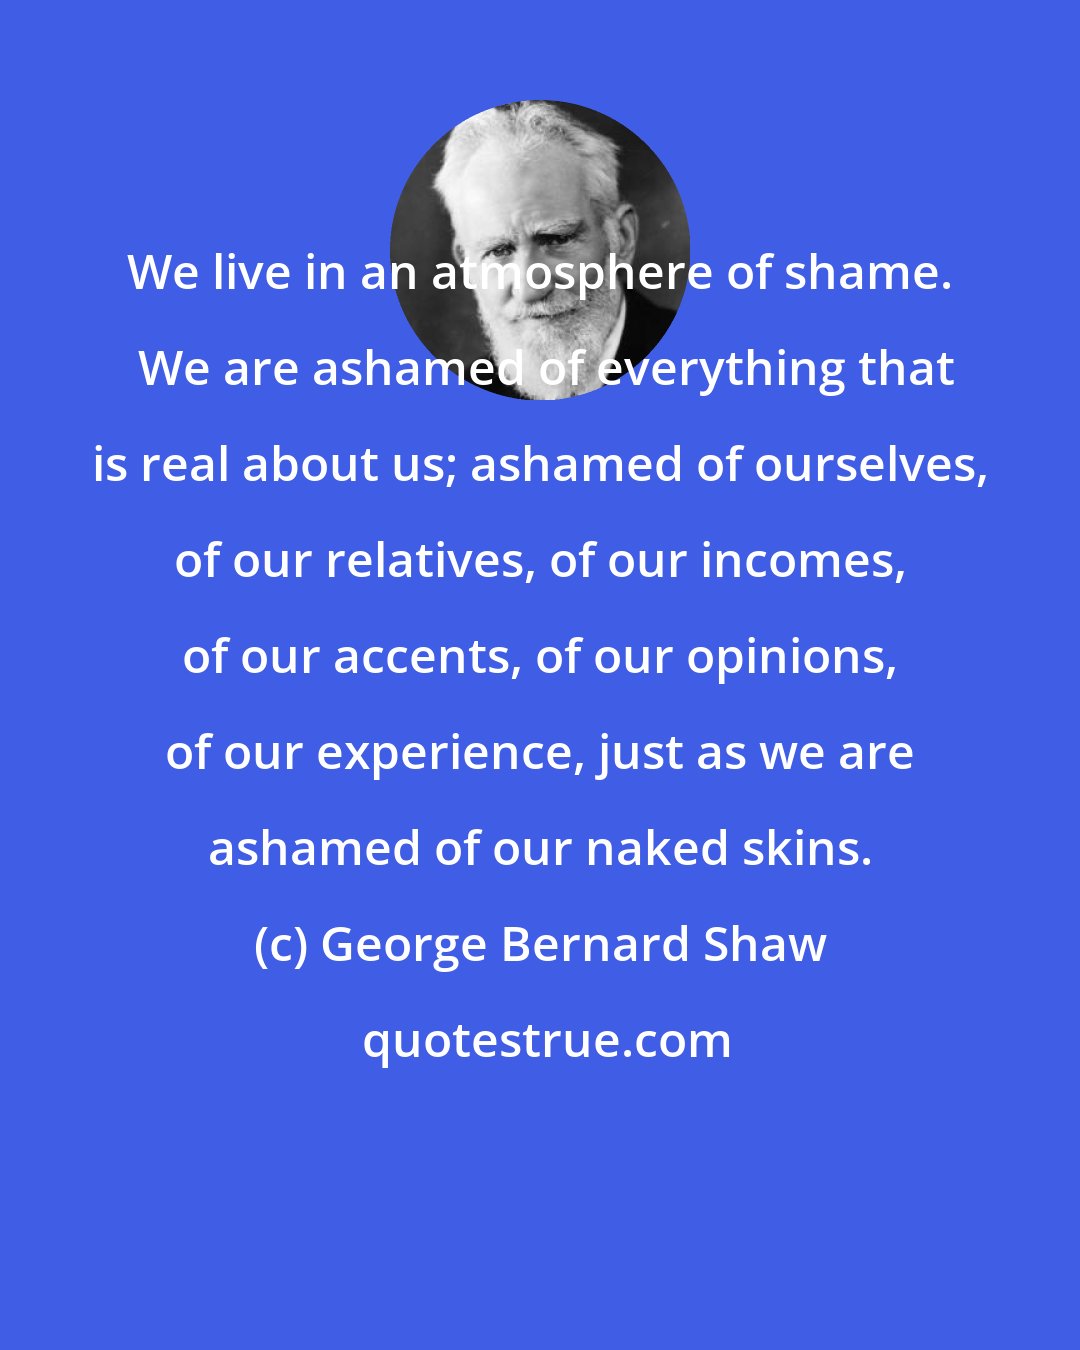 George Bernard Shaw: We live in an atmosphere of shame.  We are ashamed of everything that is real about us; ashamed of ourselves, of our relatives, of our incomes, of our accents, of our opinions, of our experience, just as we are ashamed of our naked skins.